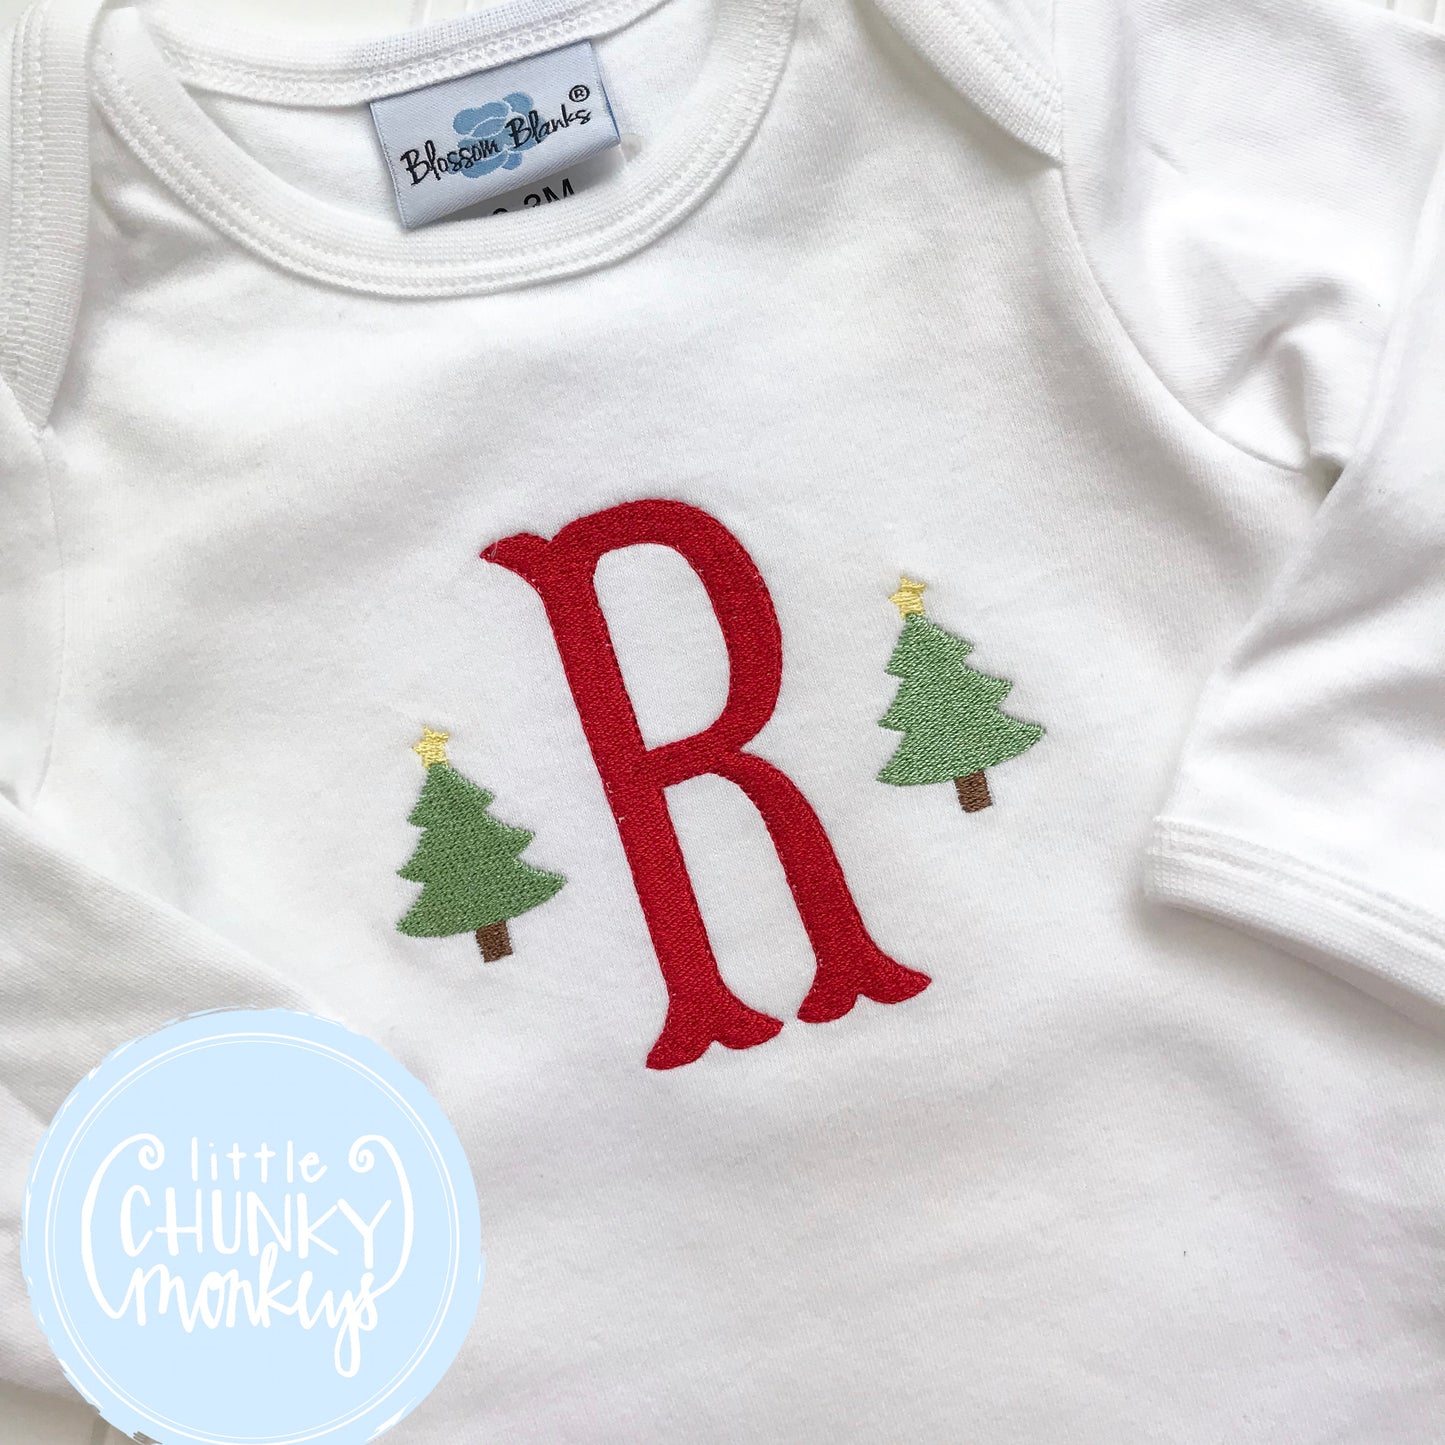 Boy Shirt - Stitched Name or Single Initial with Mini Christmas Trees